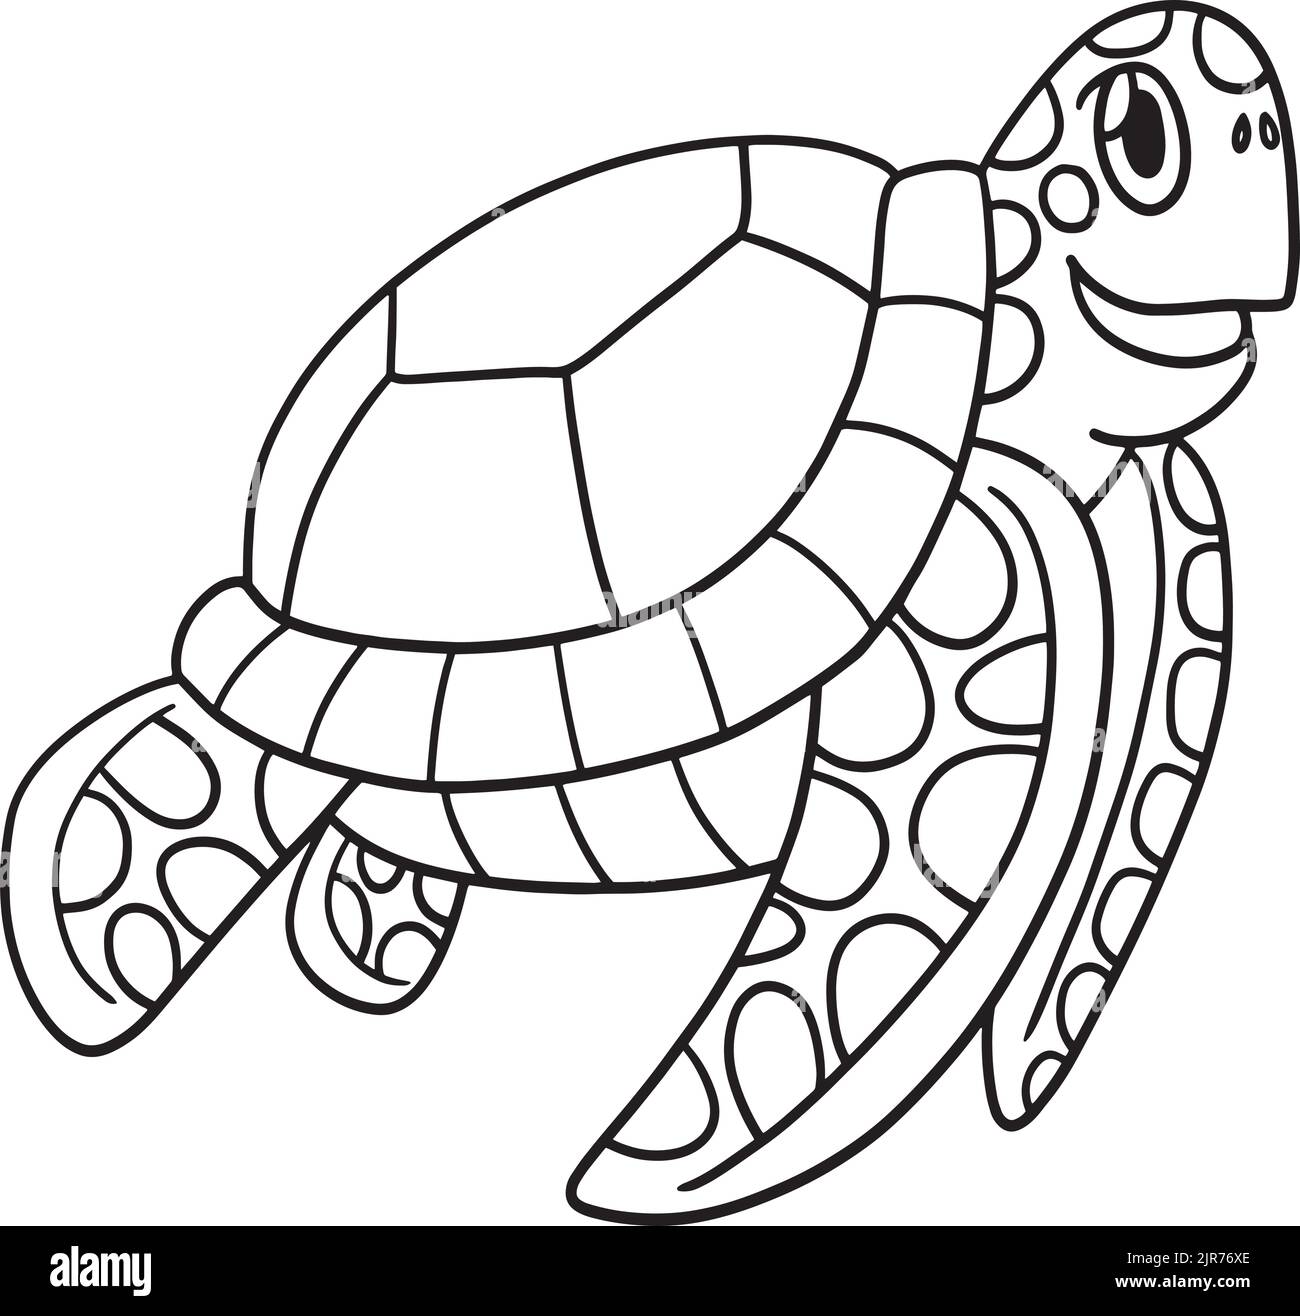 Turtle Isolated Coloring Page for Kids Stock Vector